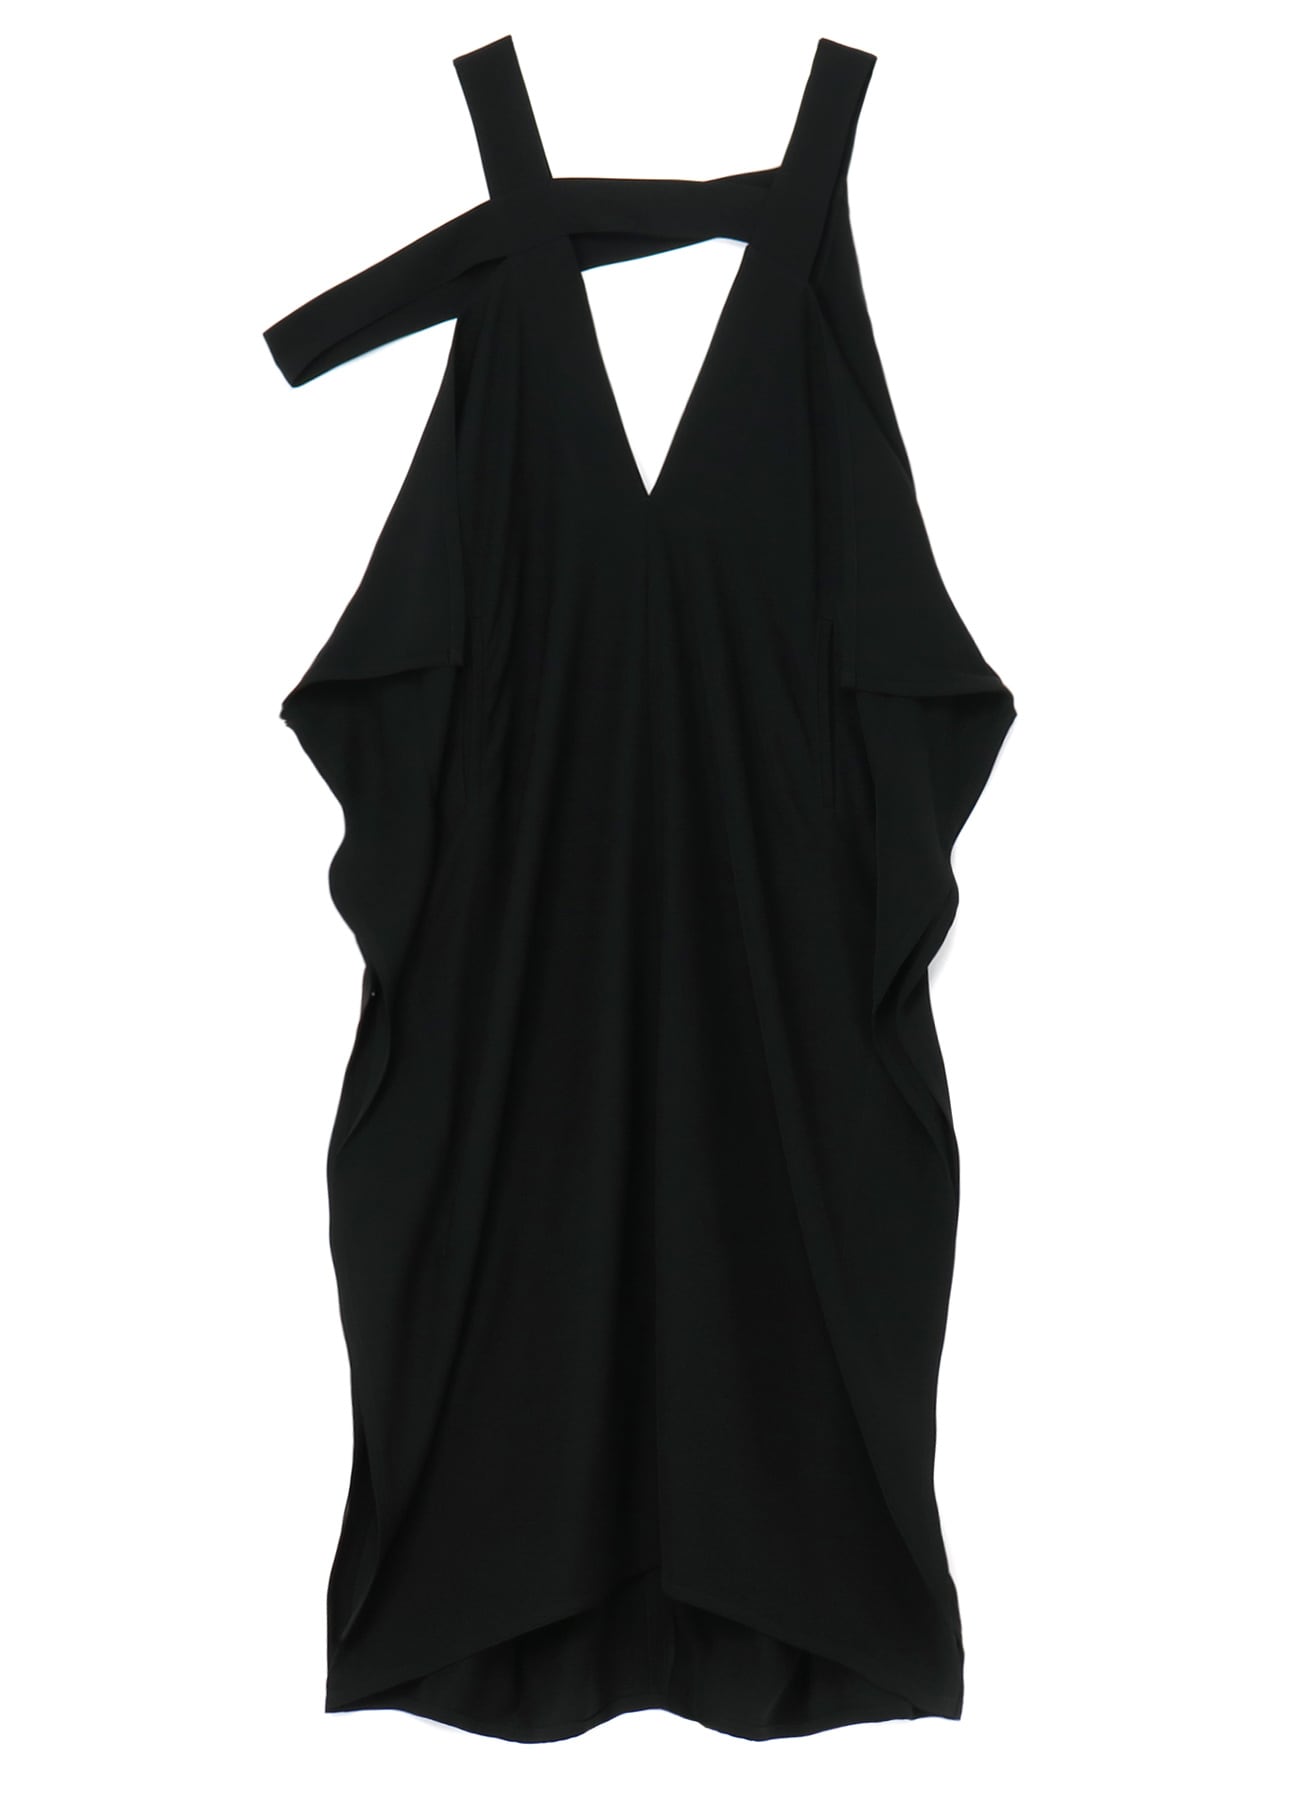 SQUARED DRESS WITH DOUBLE LAYER SATIN(S Black): LIMI feu｜THE SHOP